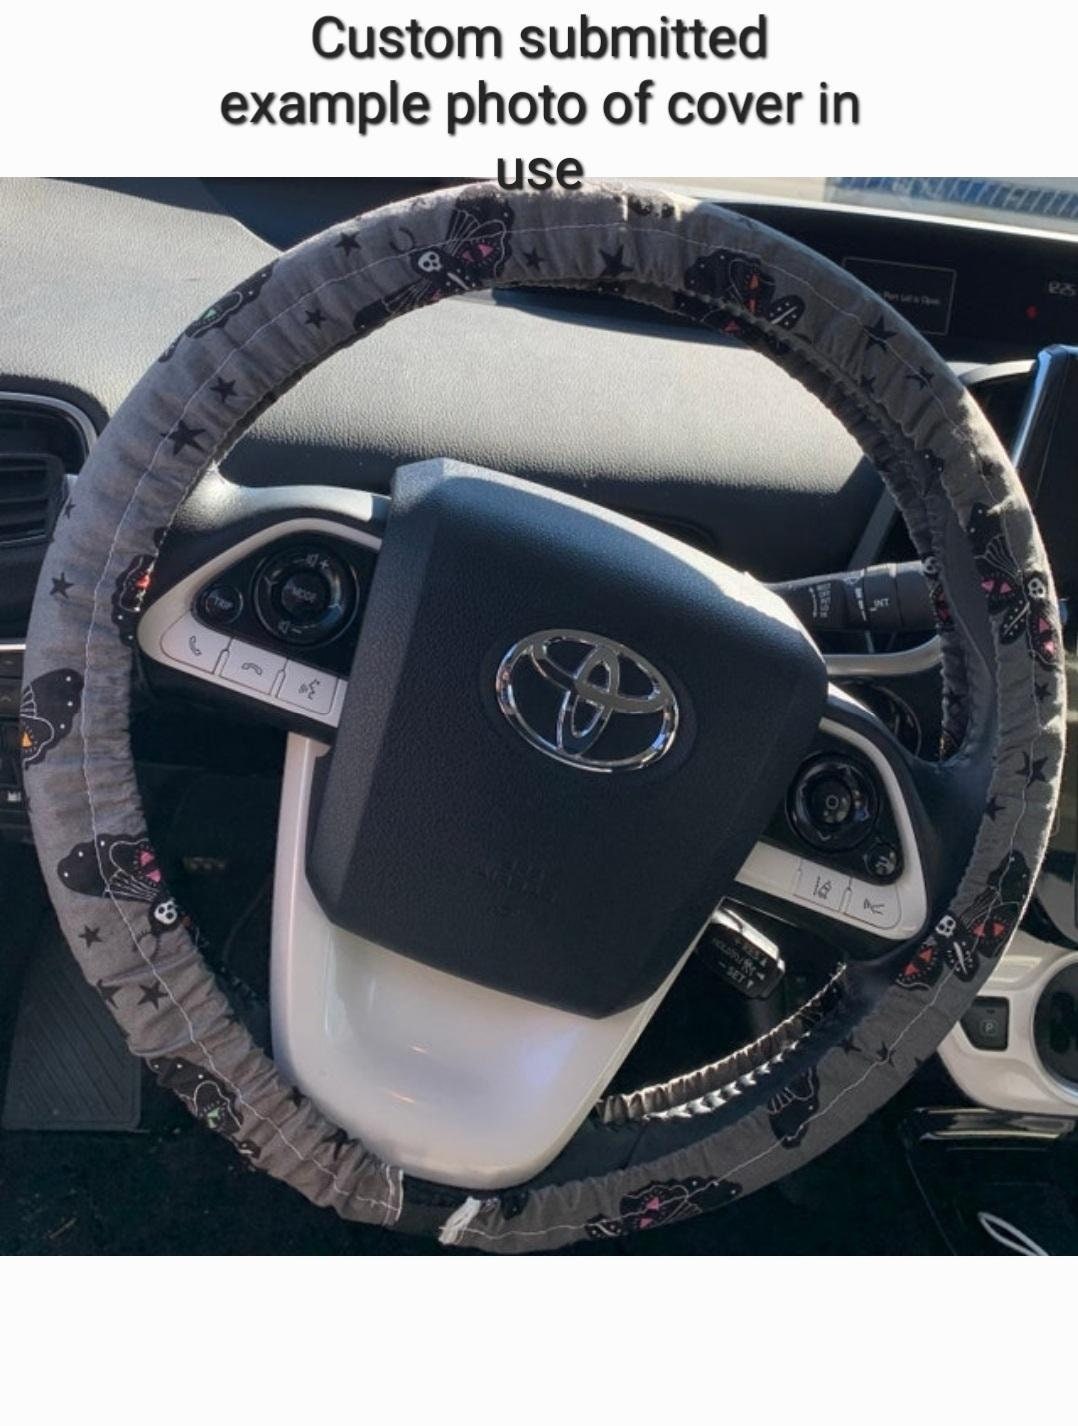 Striped Floral Steering Wheel Cover - Harlow's Store and Garden Gifts